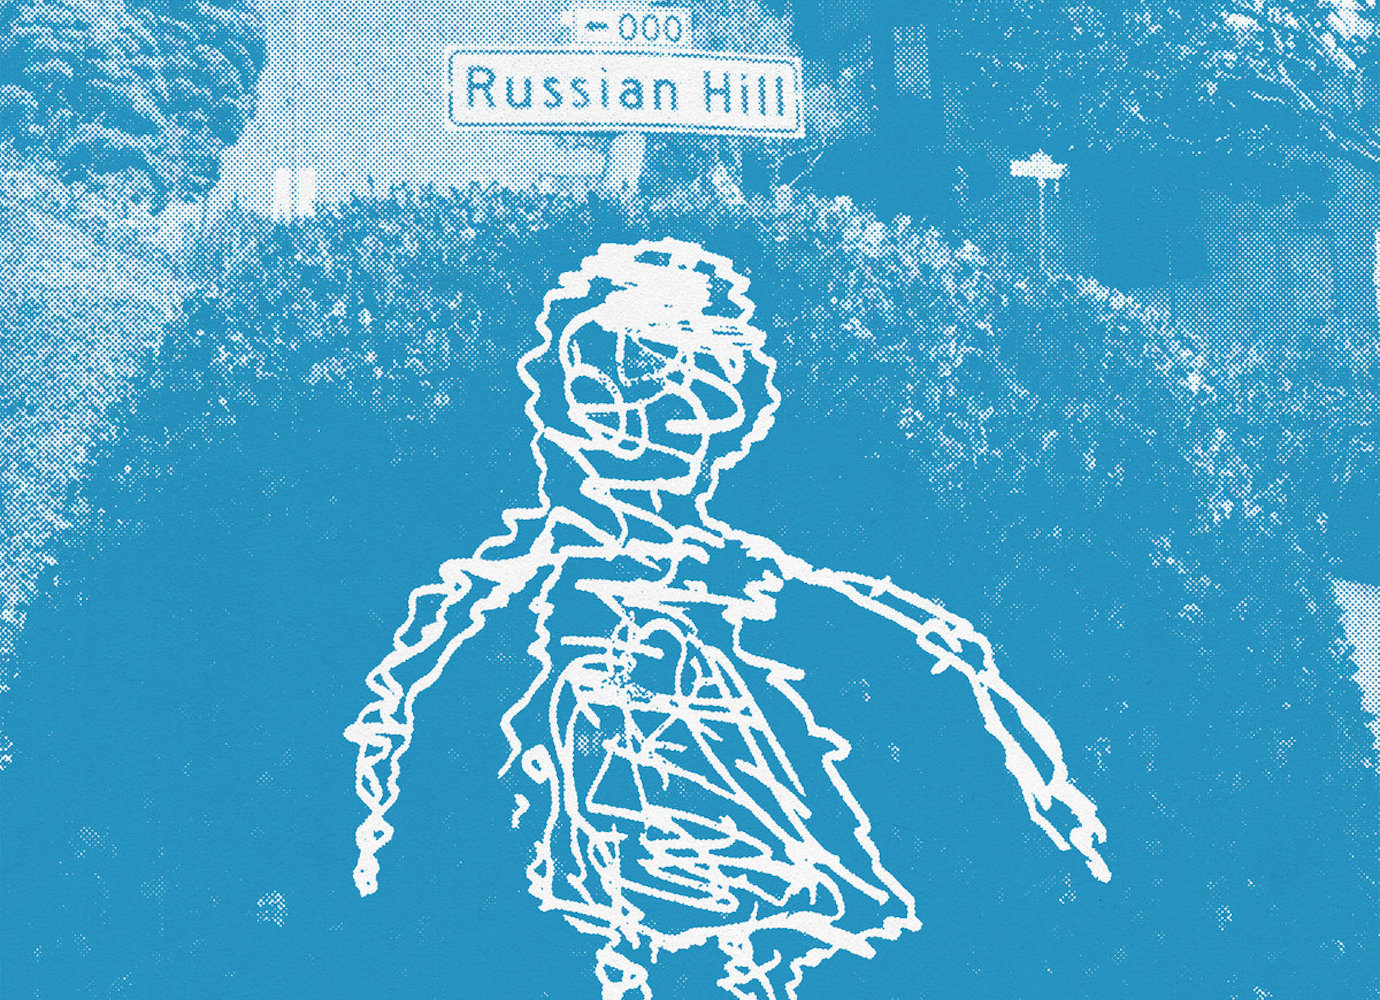 Russian Hill Chiropractic: new electronic music meditating on what it means to be Russian